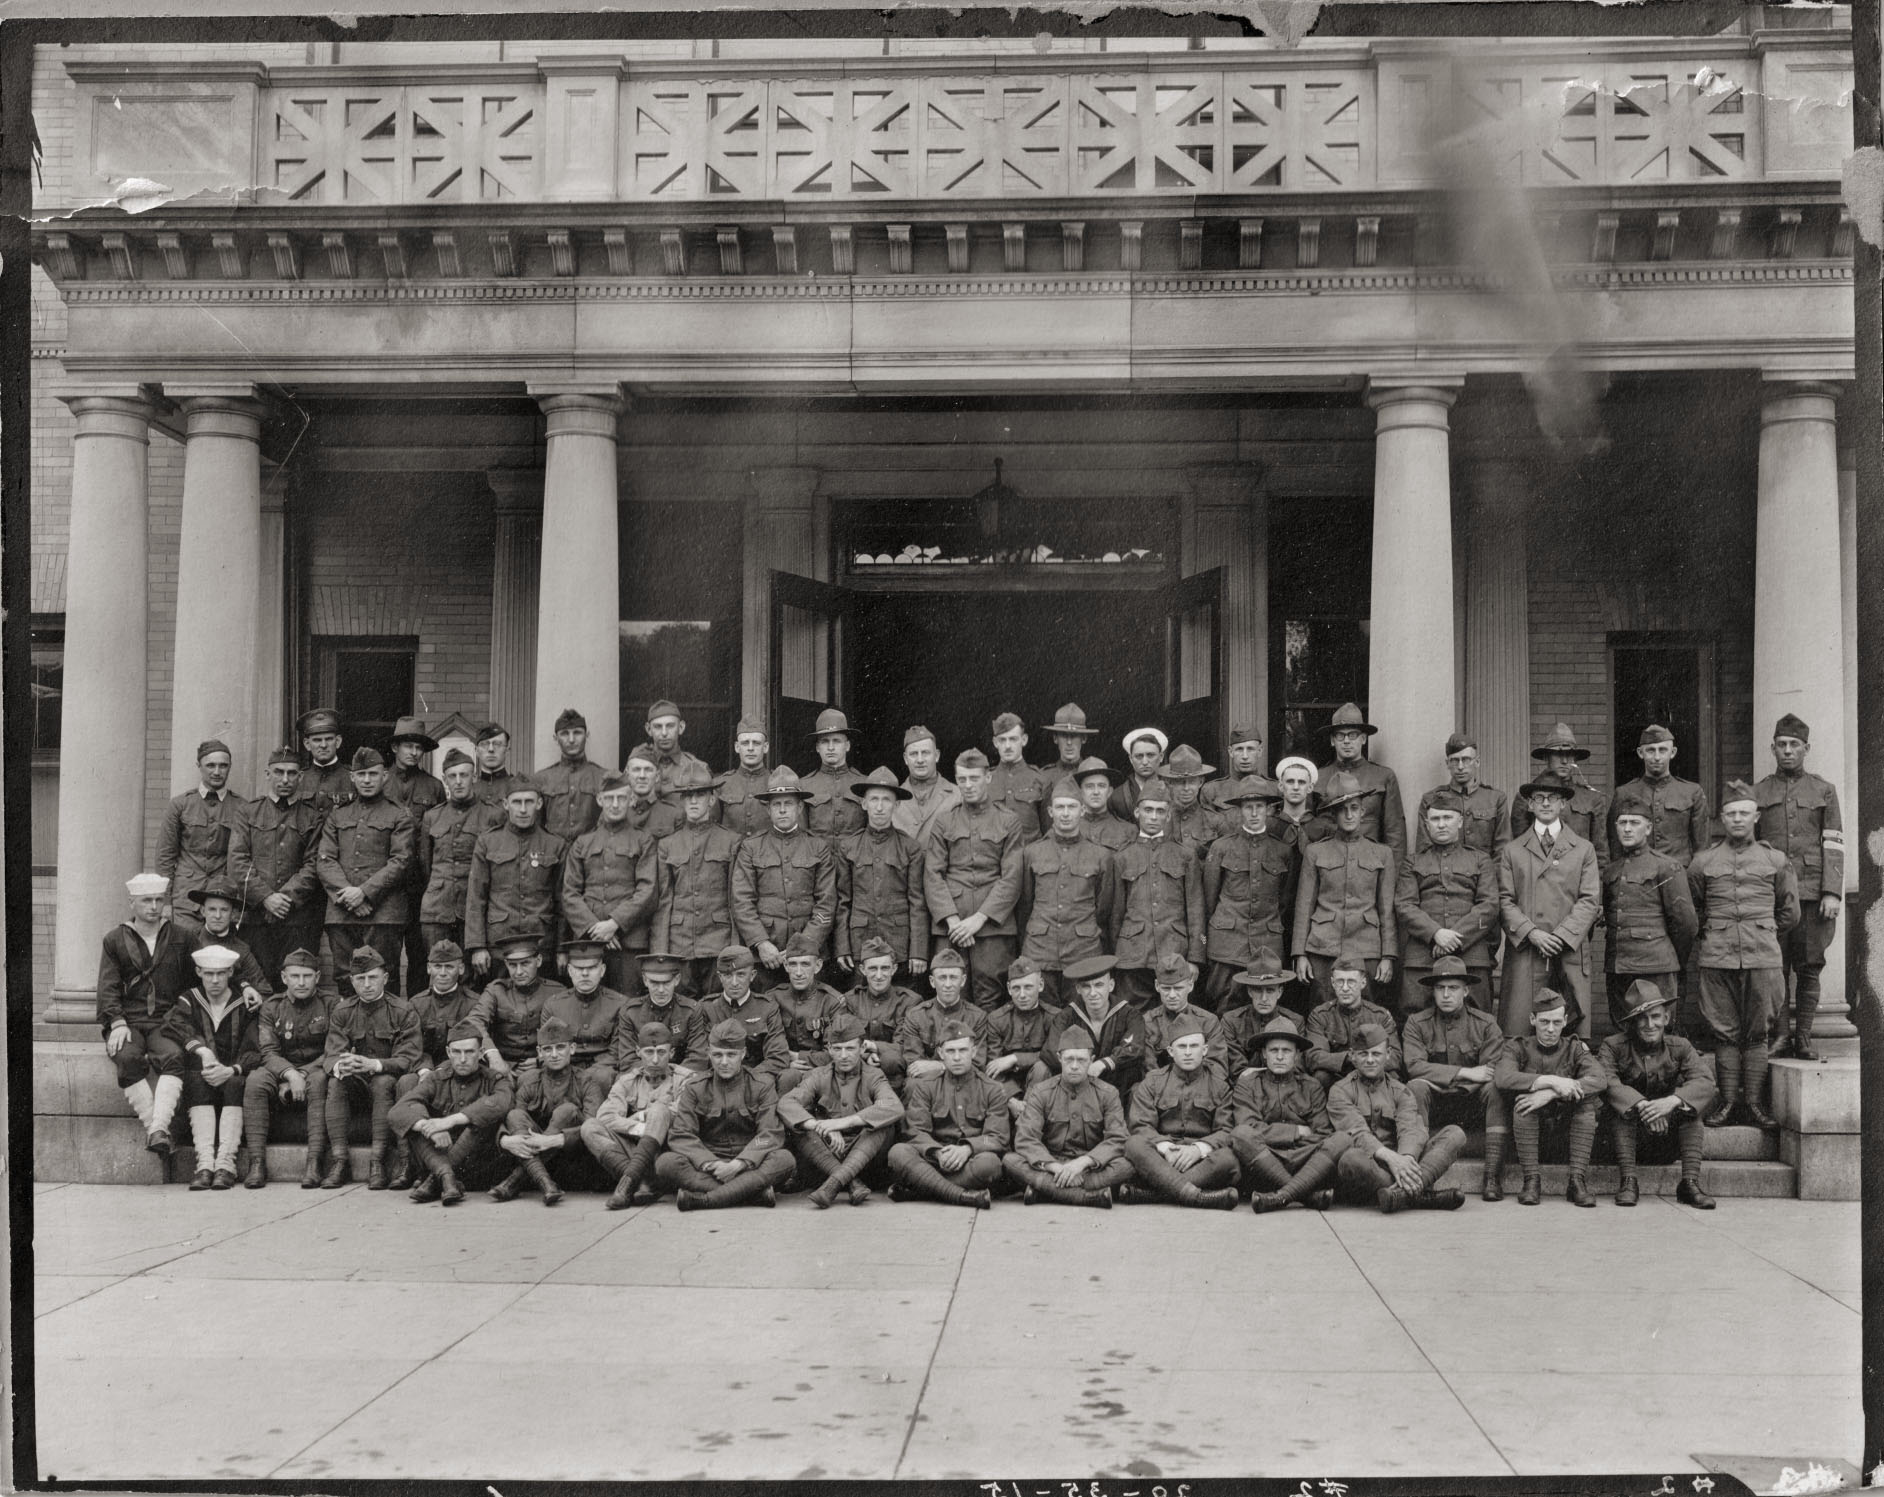 The photographer was Woodhead Photo Co. of Springfield, Massachusetts. Unknown where the photo was taken. It looks like different branches of the military are represented. 9th man from the left 2nd row...could that be Eddie Rickenbacker? He's the only one with wings above his pocket. Perhaps someone may recognize the building.